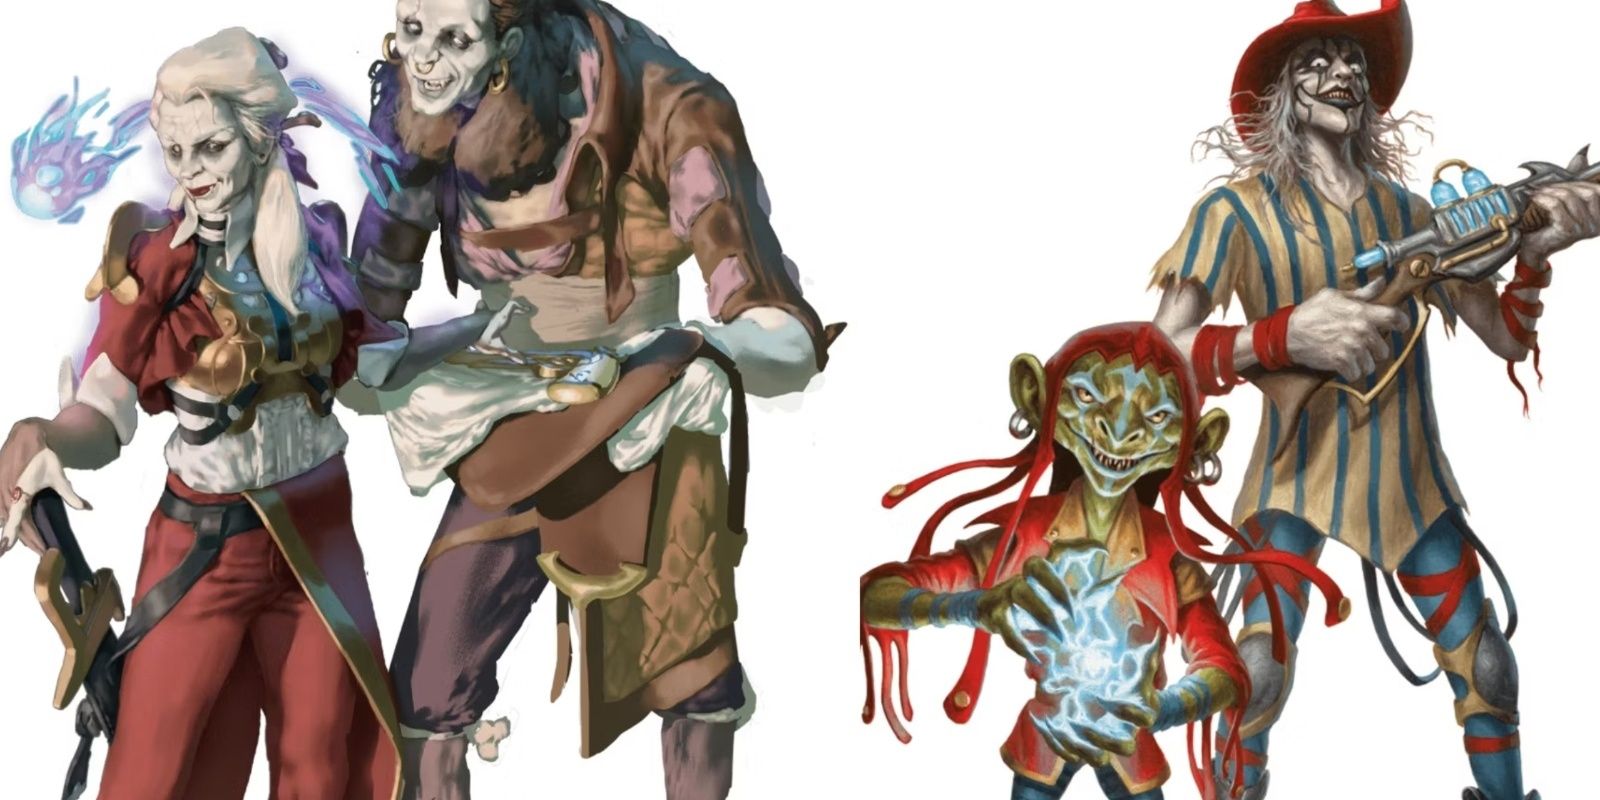 Dungeons & Dragons Vampirate Man And Woman With Firearms And Space Clowns Wielding A Laser Rifle And Magic